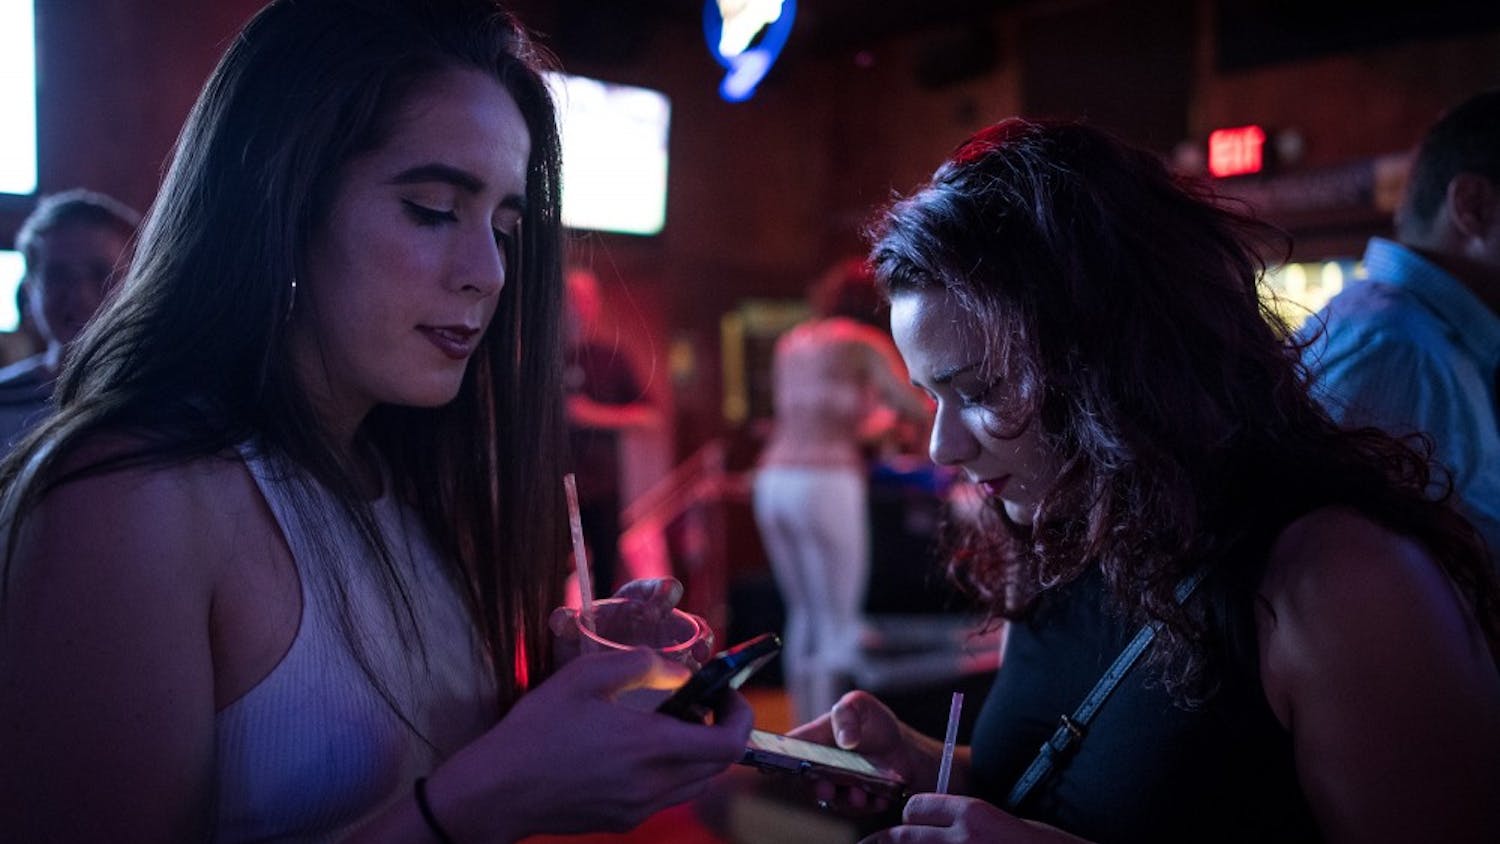 Star Tribune reporters Natalie Daher and Danielle Fox check their Tinder notifications and messages while waiting near the entrance of Sneaky Pete's before their first Tinder Social dates late Saturday night, Aug. 6, 2016 in Minneapolis.  (Aaron Lavinsky/Minneapolis Star Tribune/TNS) 